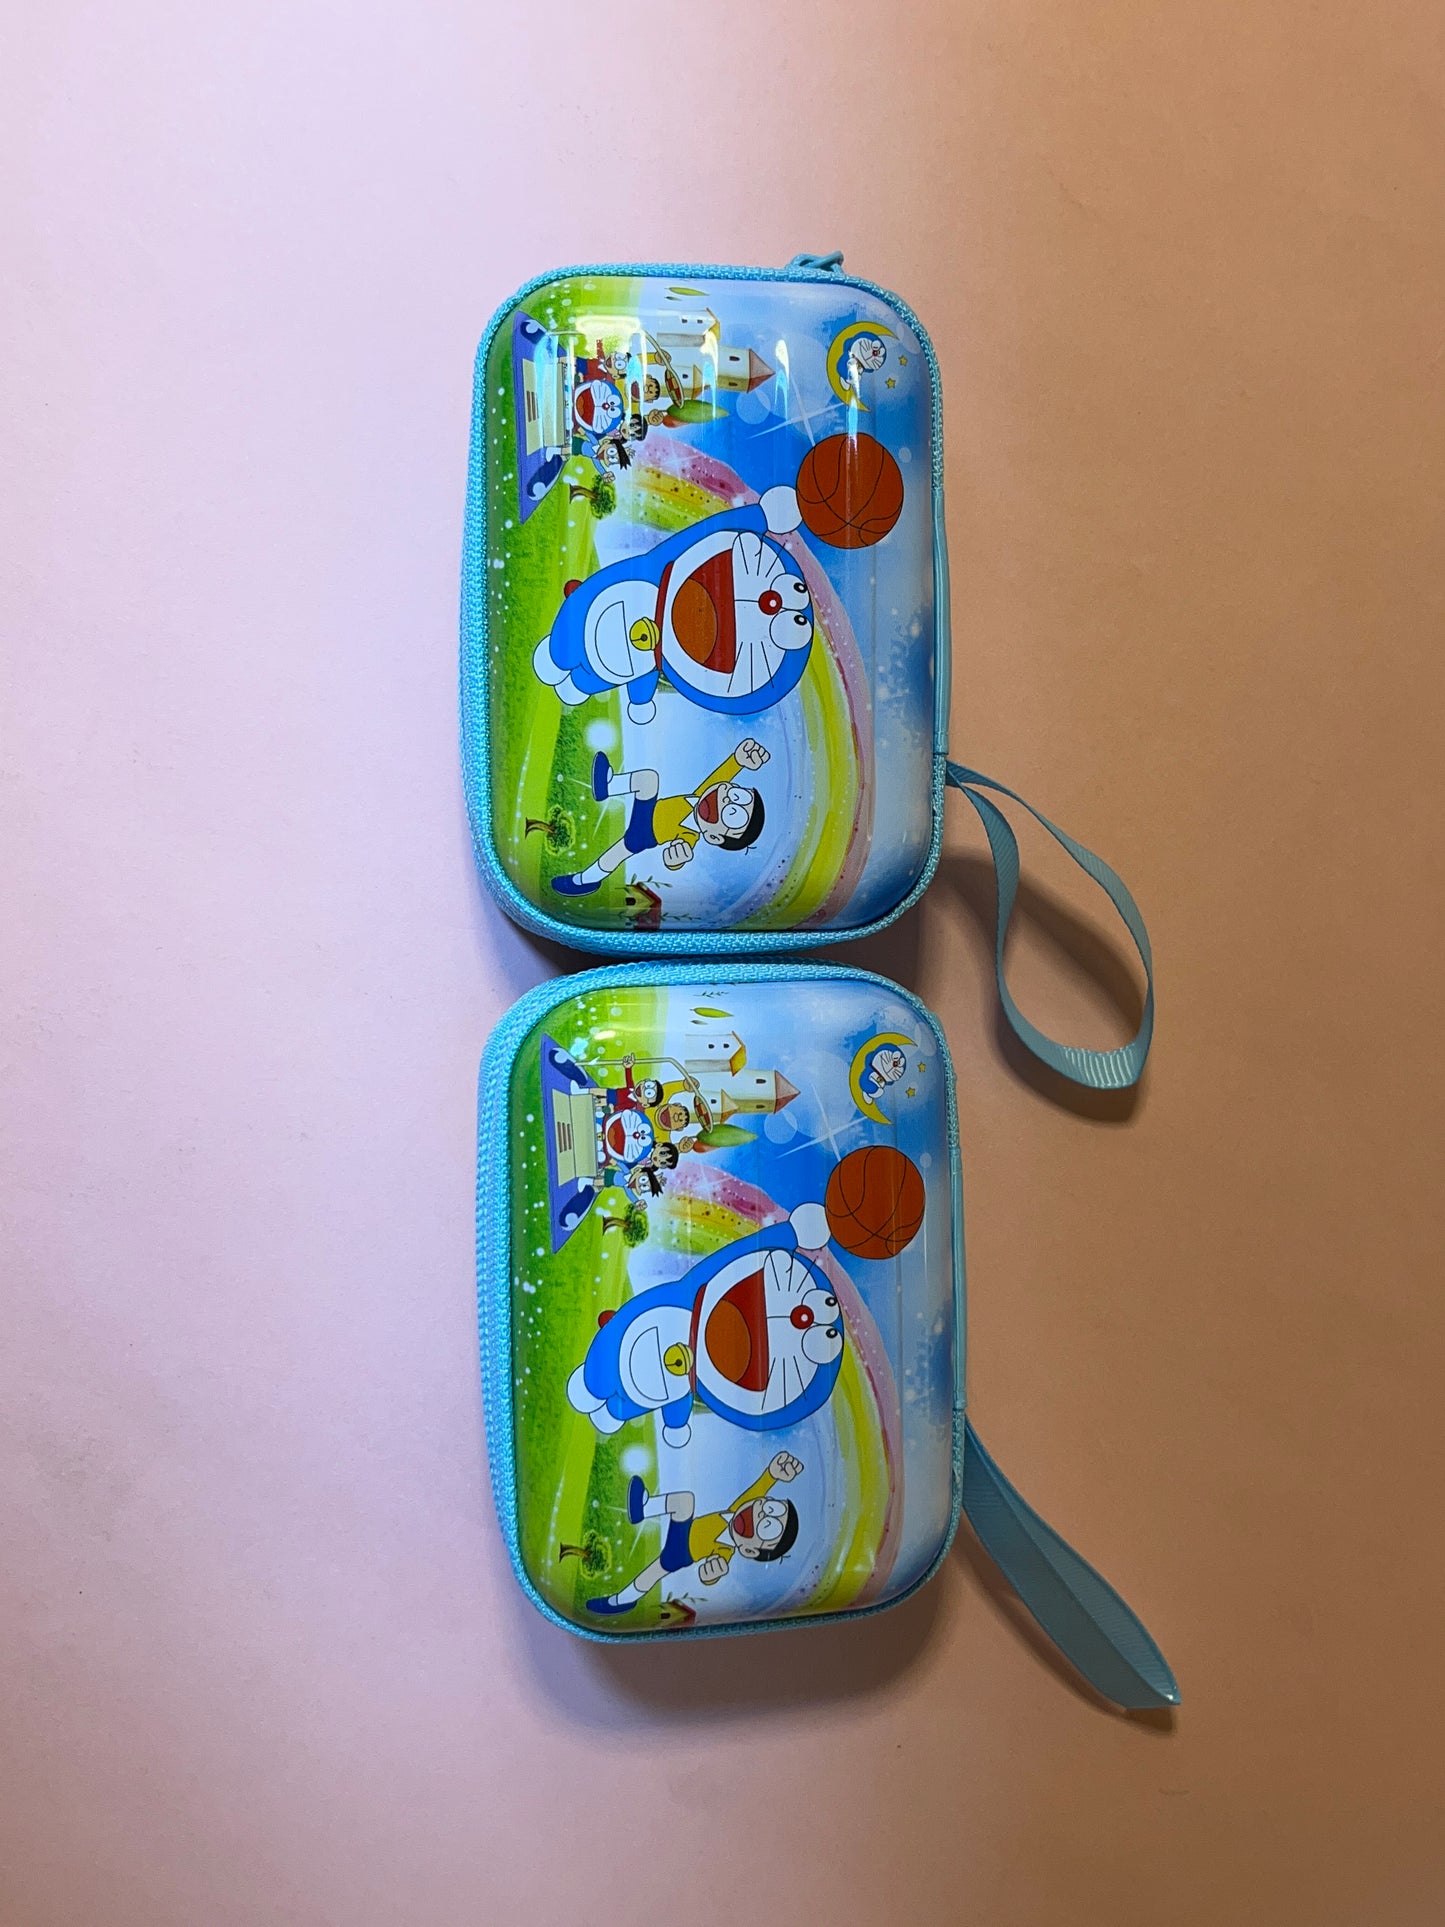 BATUTA -POUCH-for Earphone Adapter Buy Return Gifts for Kids of All Age Group pack of 2